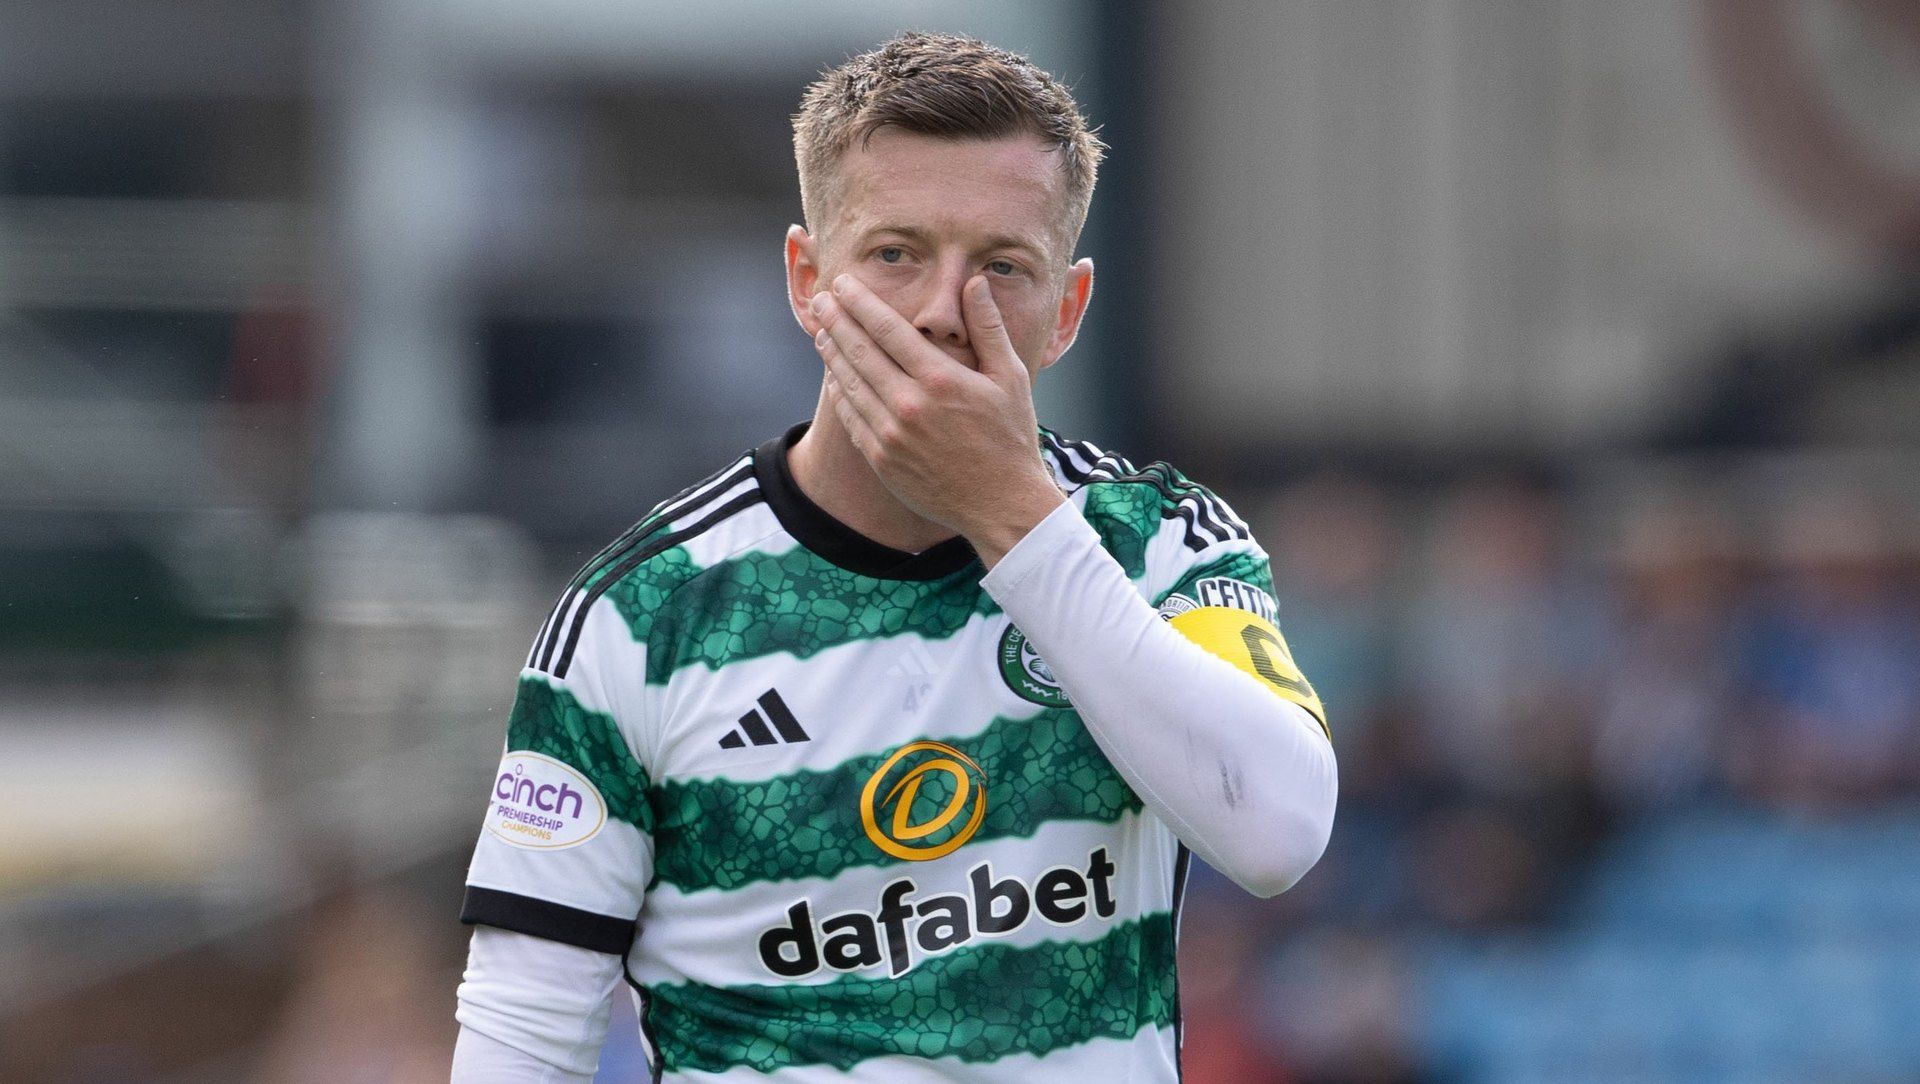 Starfelt more solid', 'never in trouble' - Celtic fans react to